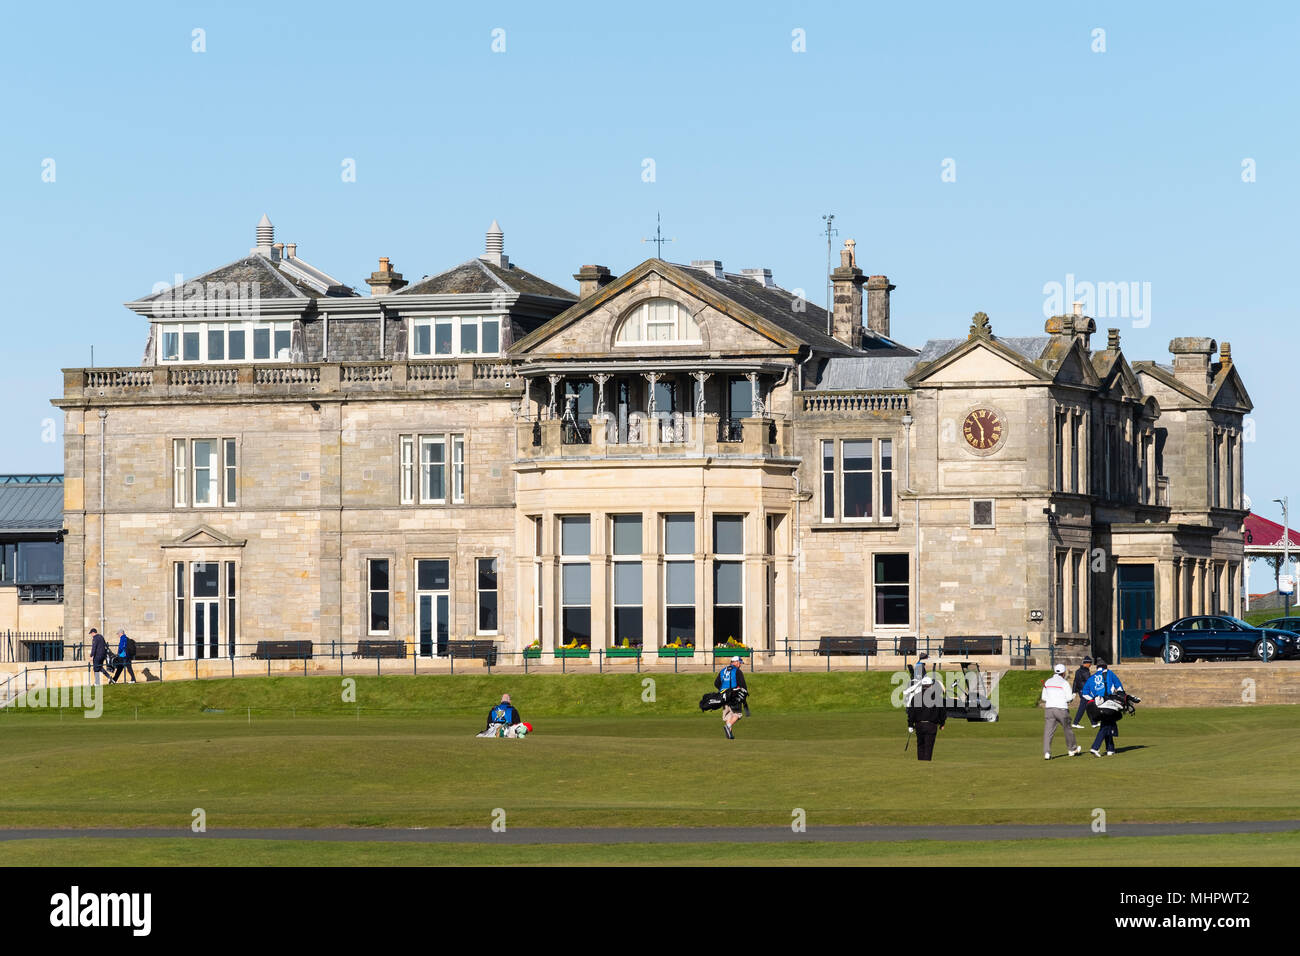 Exterior view of the club house of The Royal and Ancient Golf Club (R&A) Old Course in St Andrews, Fife, Scotland, UK. Stock Photo